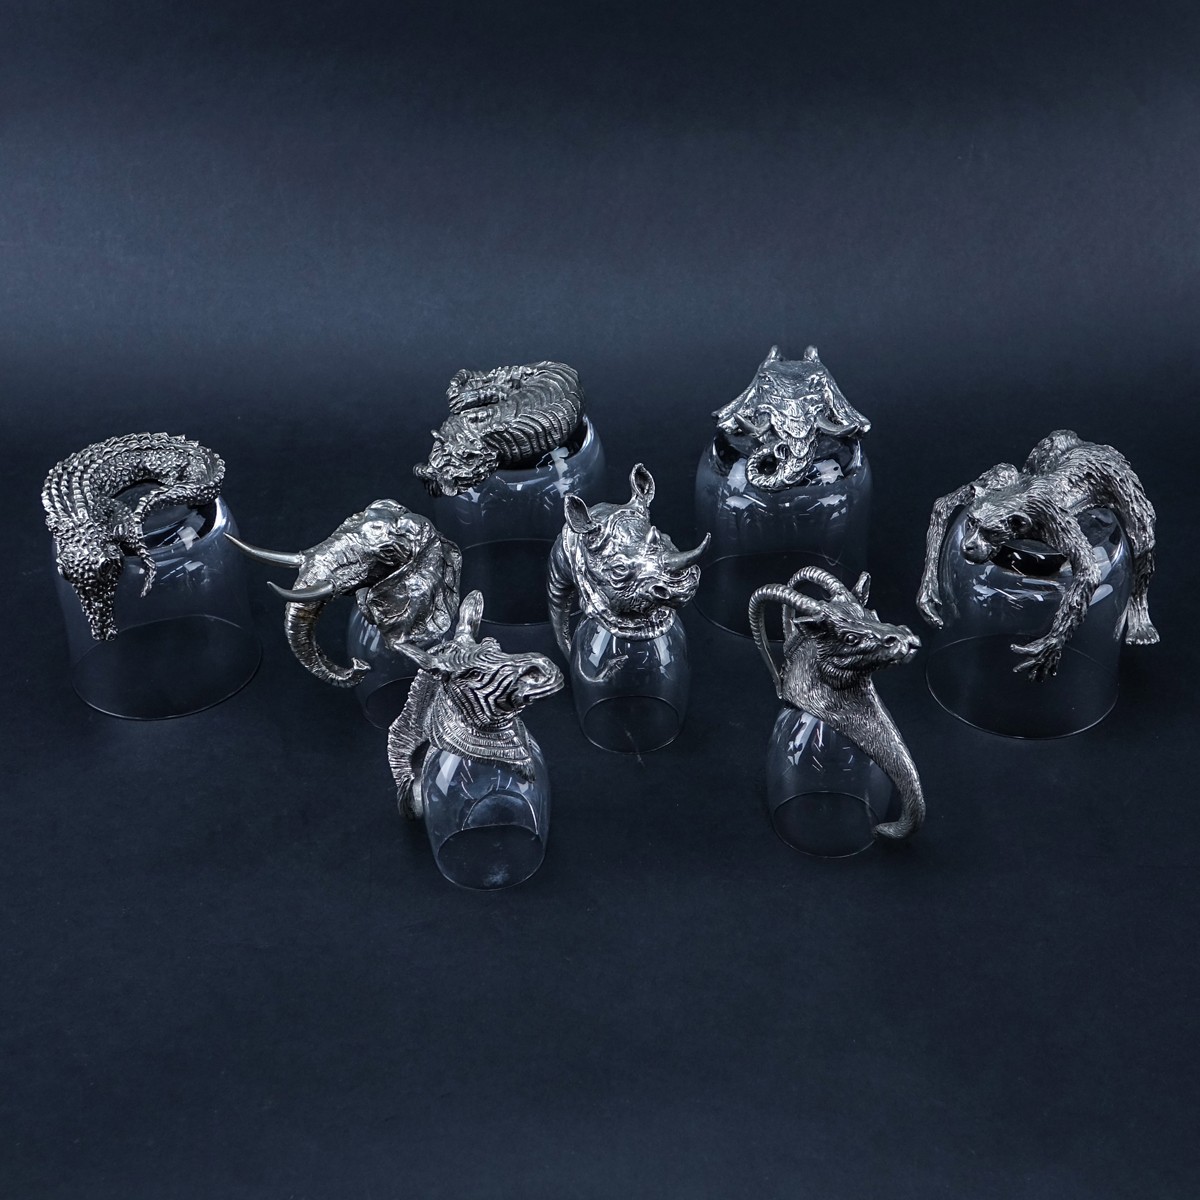 Frankli Wild Royal Selangor Pewter and Glass Barware. Eight (8) glasses with South African animal f